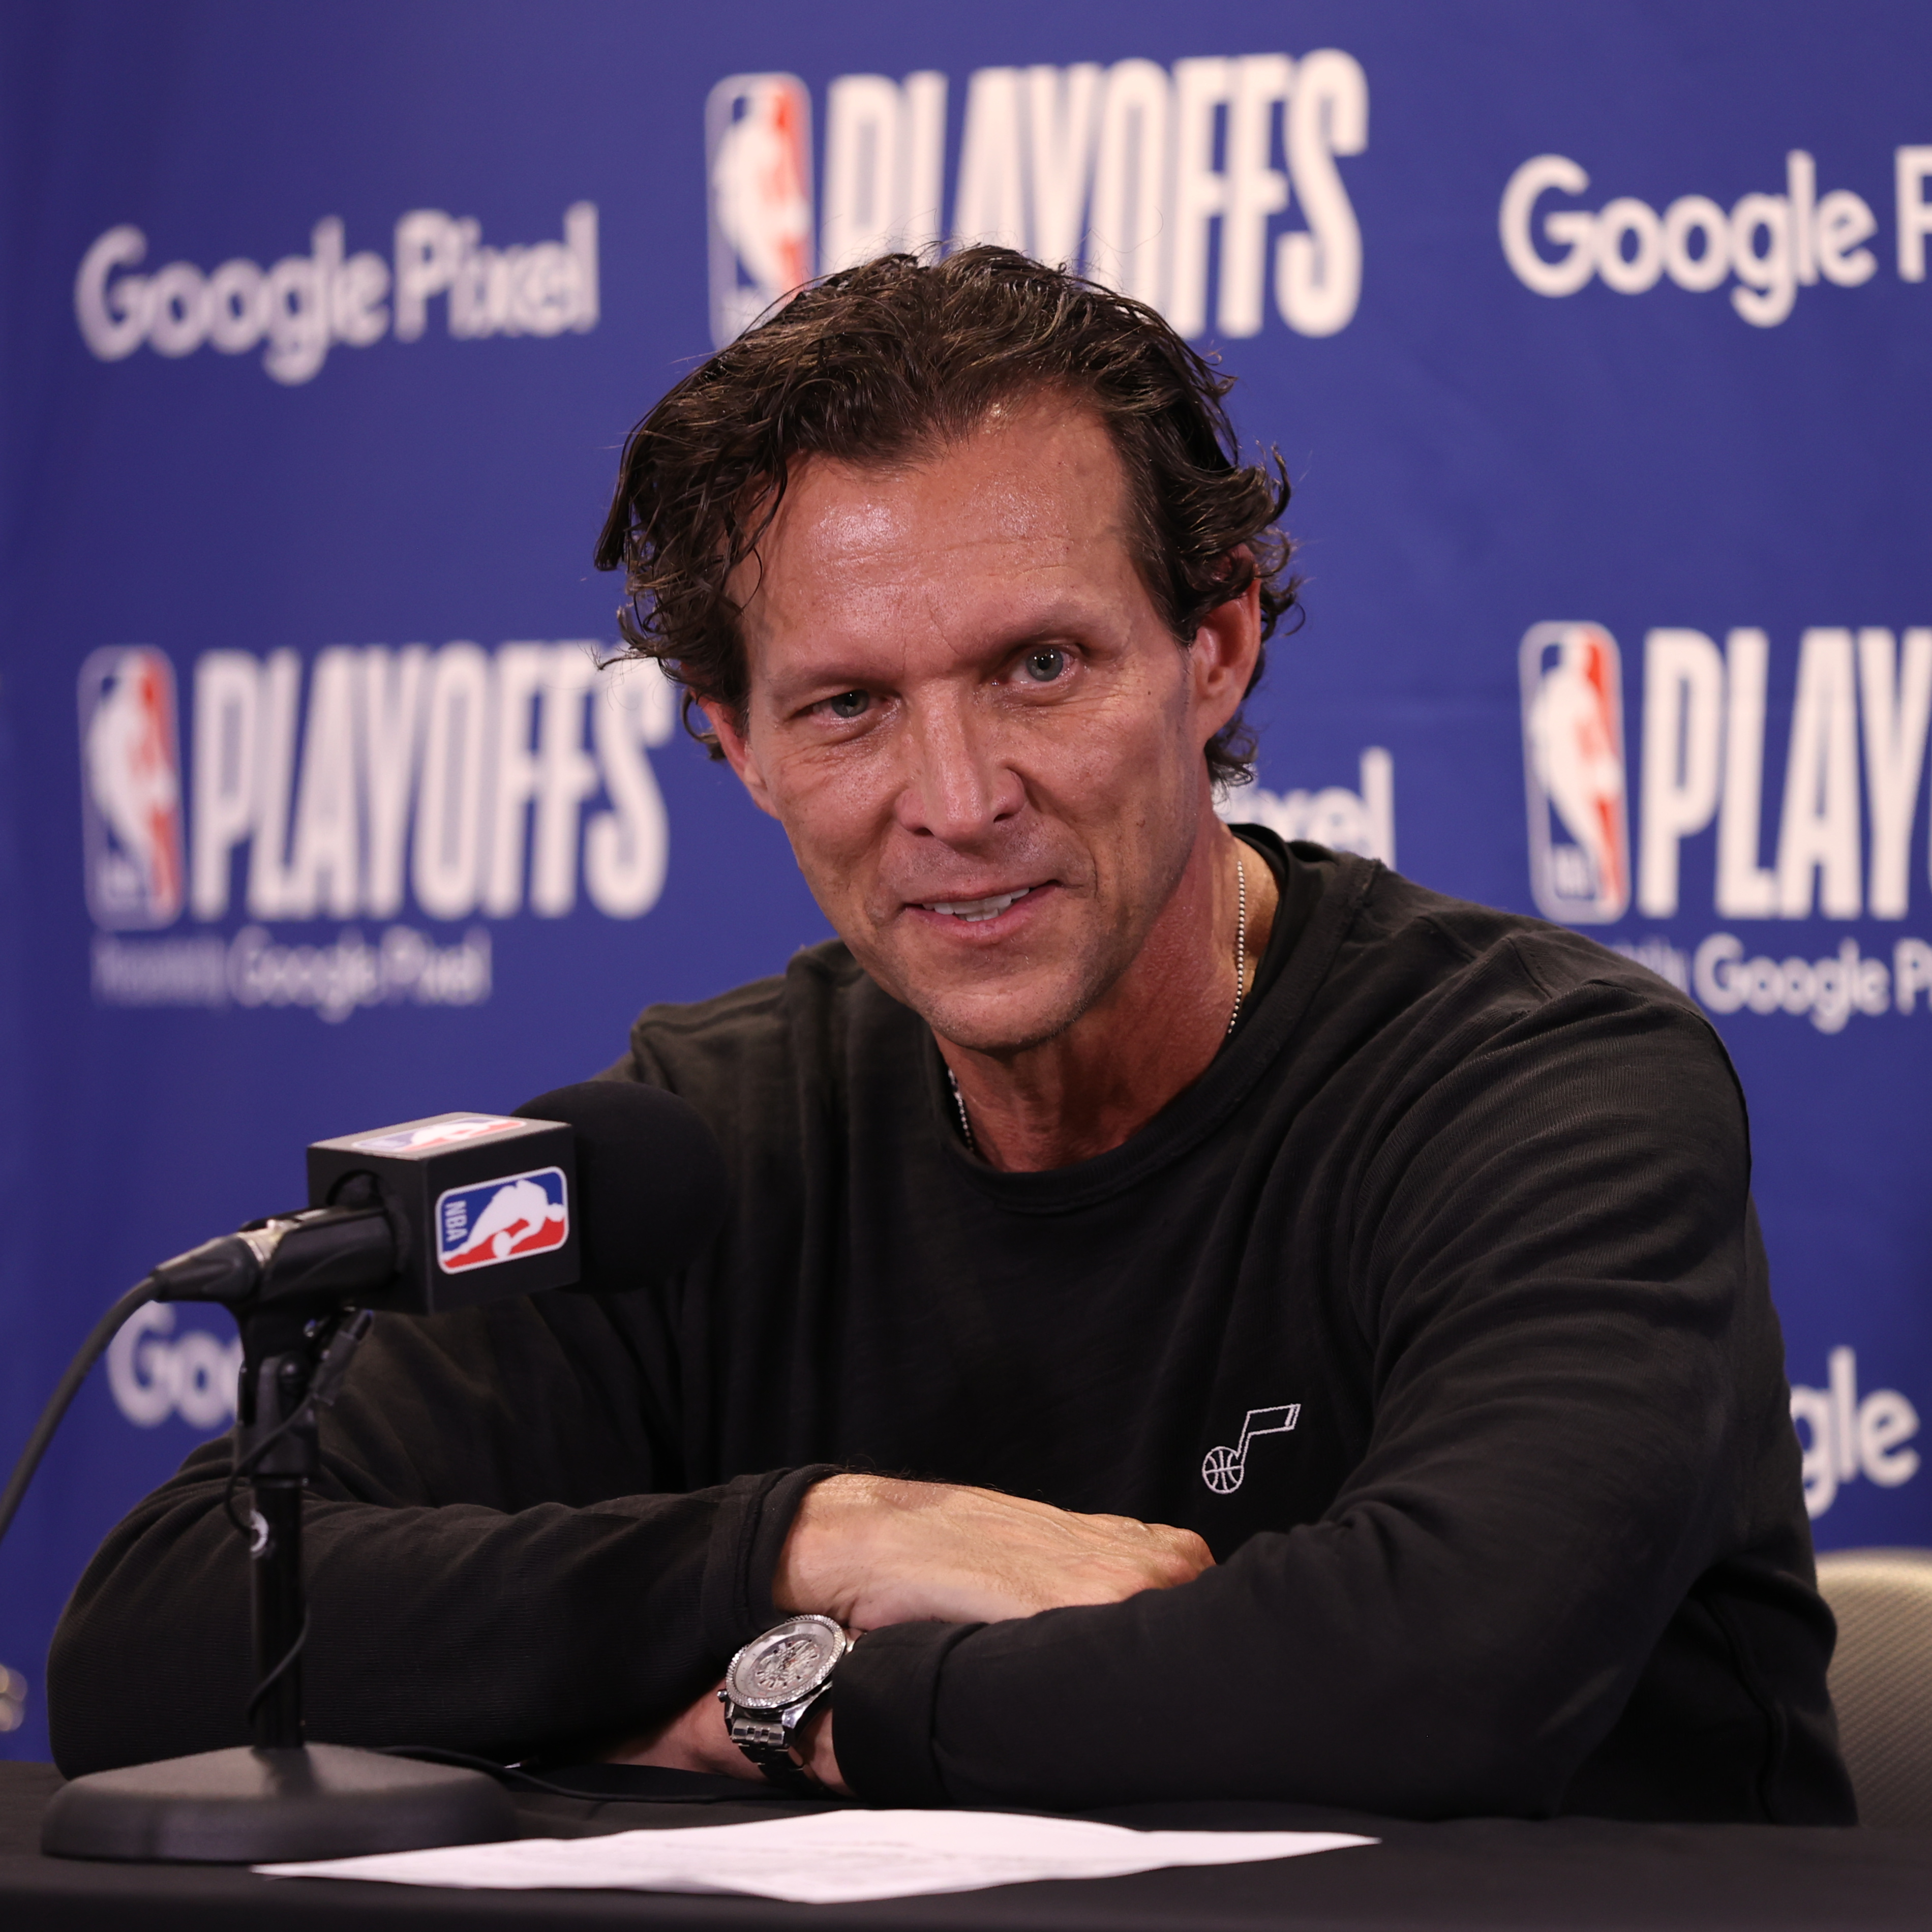 NBA Rumors: Quin Snyder 'Remains Eager to Coach' After Resigning as Jazz HC